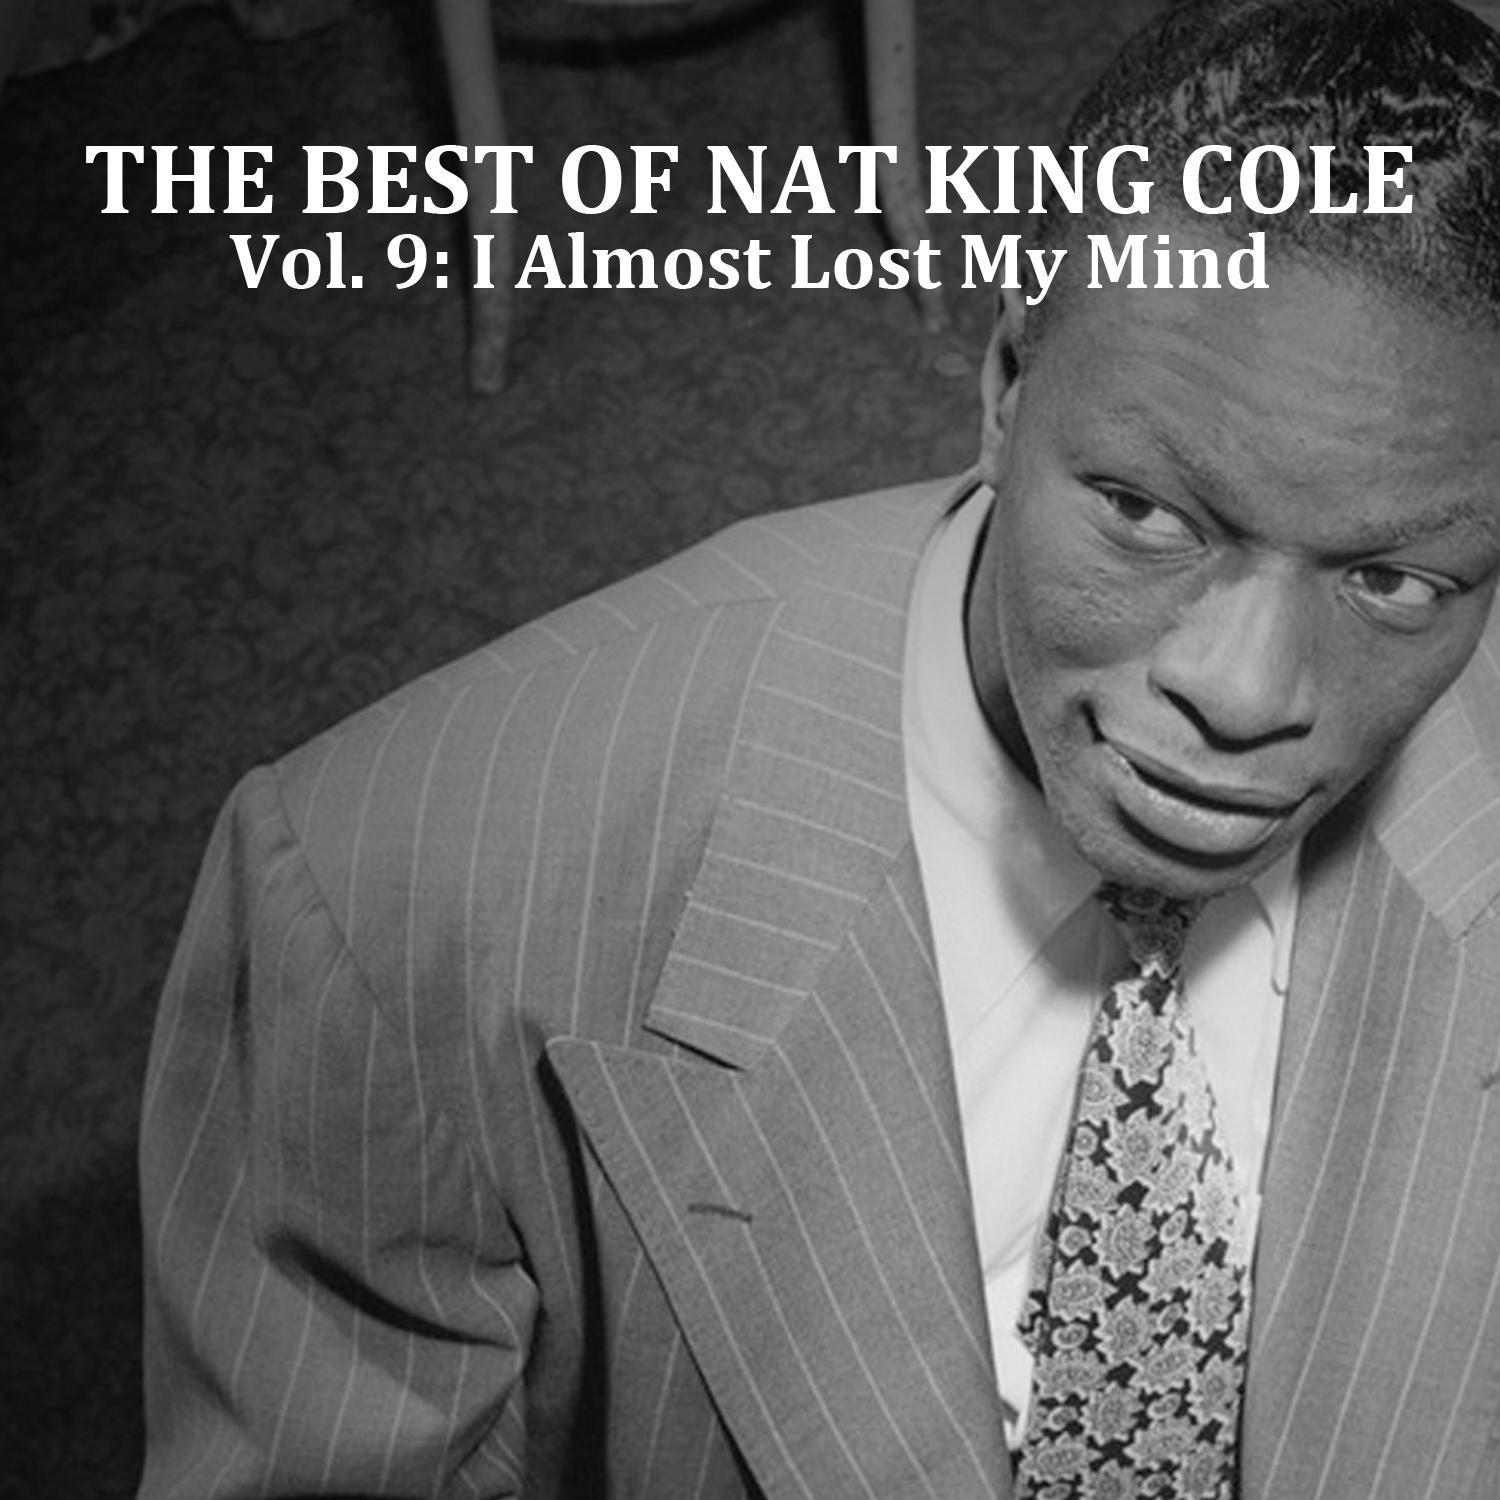 The Best of Nat King Cole, Vol. 9: I Almost Lost My Mind